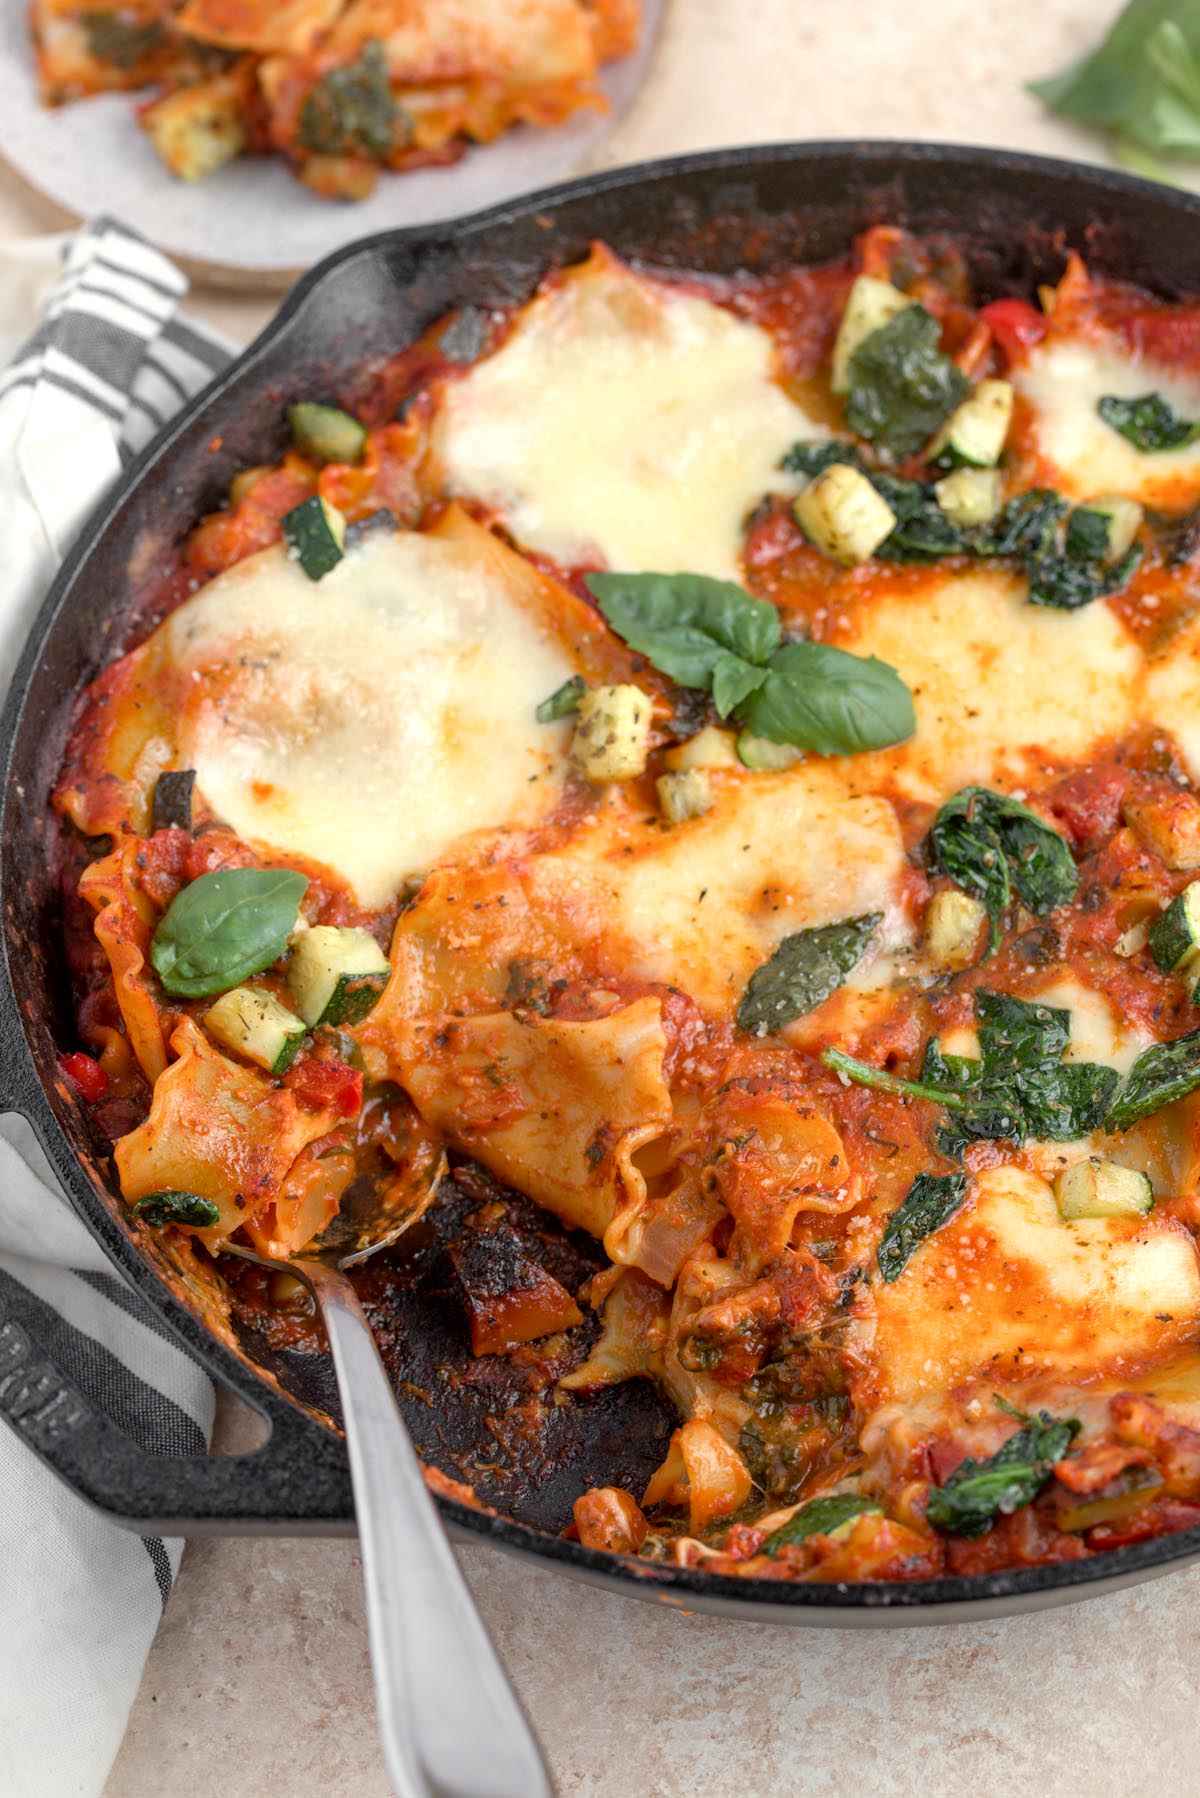 A spoon scooping vegetable lasagna skillet out of a cast iron skillet